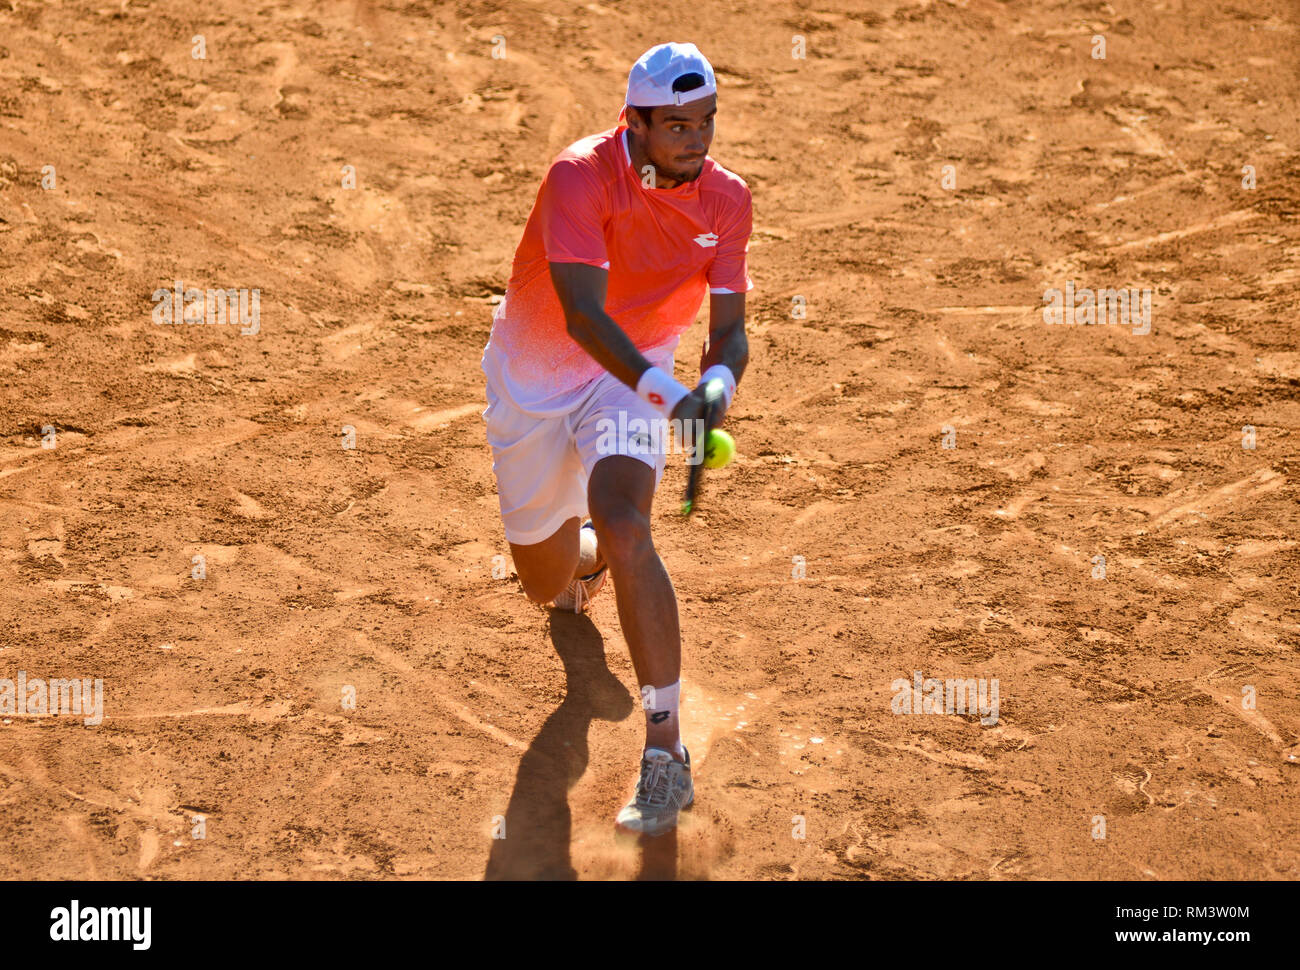 Buenos Aires, Argentina. 12th Feb 2019. Guido Pella (Argentina) defeated Francisco Cerundolo and advances to the second round of the Argentina Open, an ATP 250 tennis tournament Credit: Mariano Garcia/Alamy Live News Stock Photo